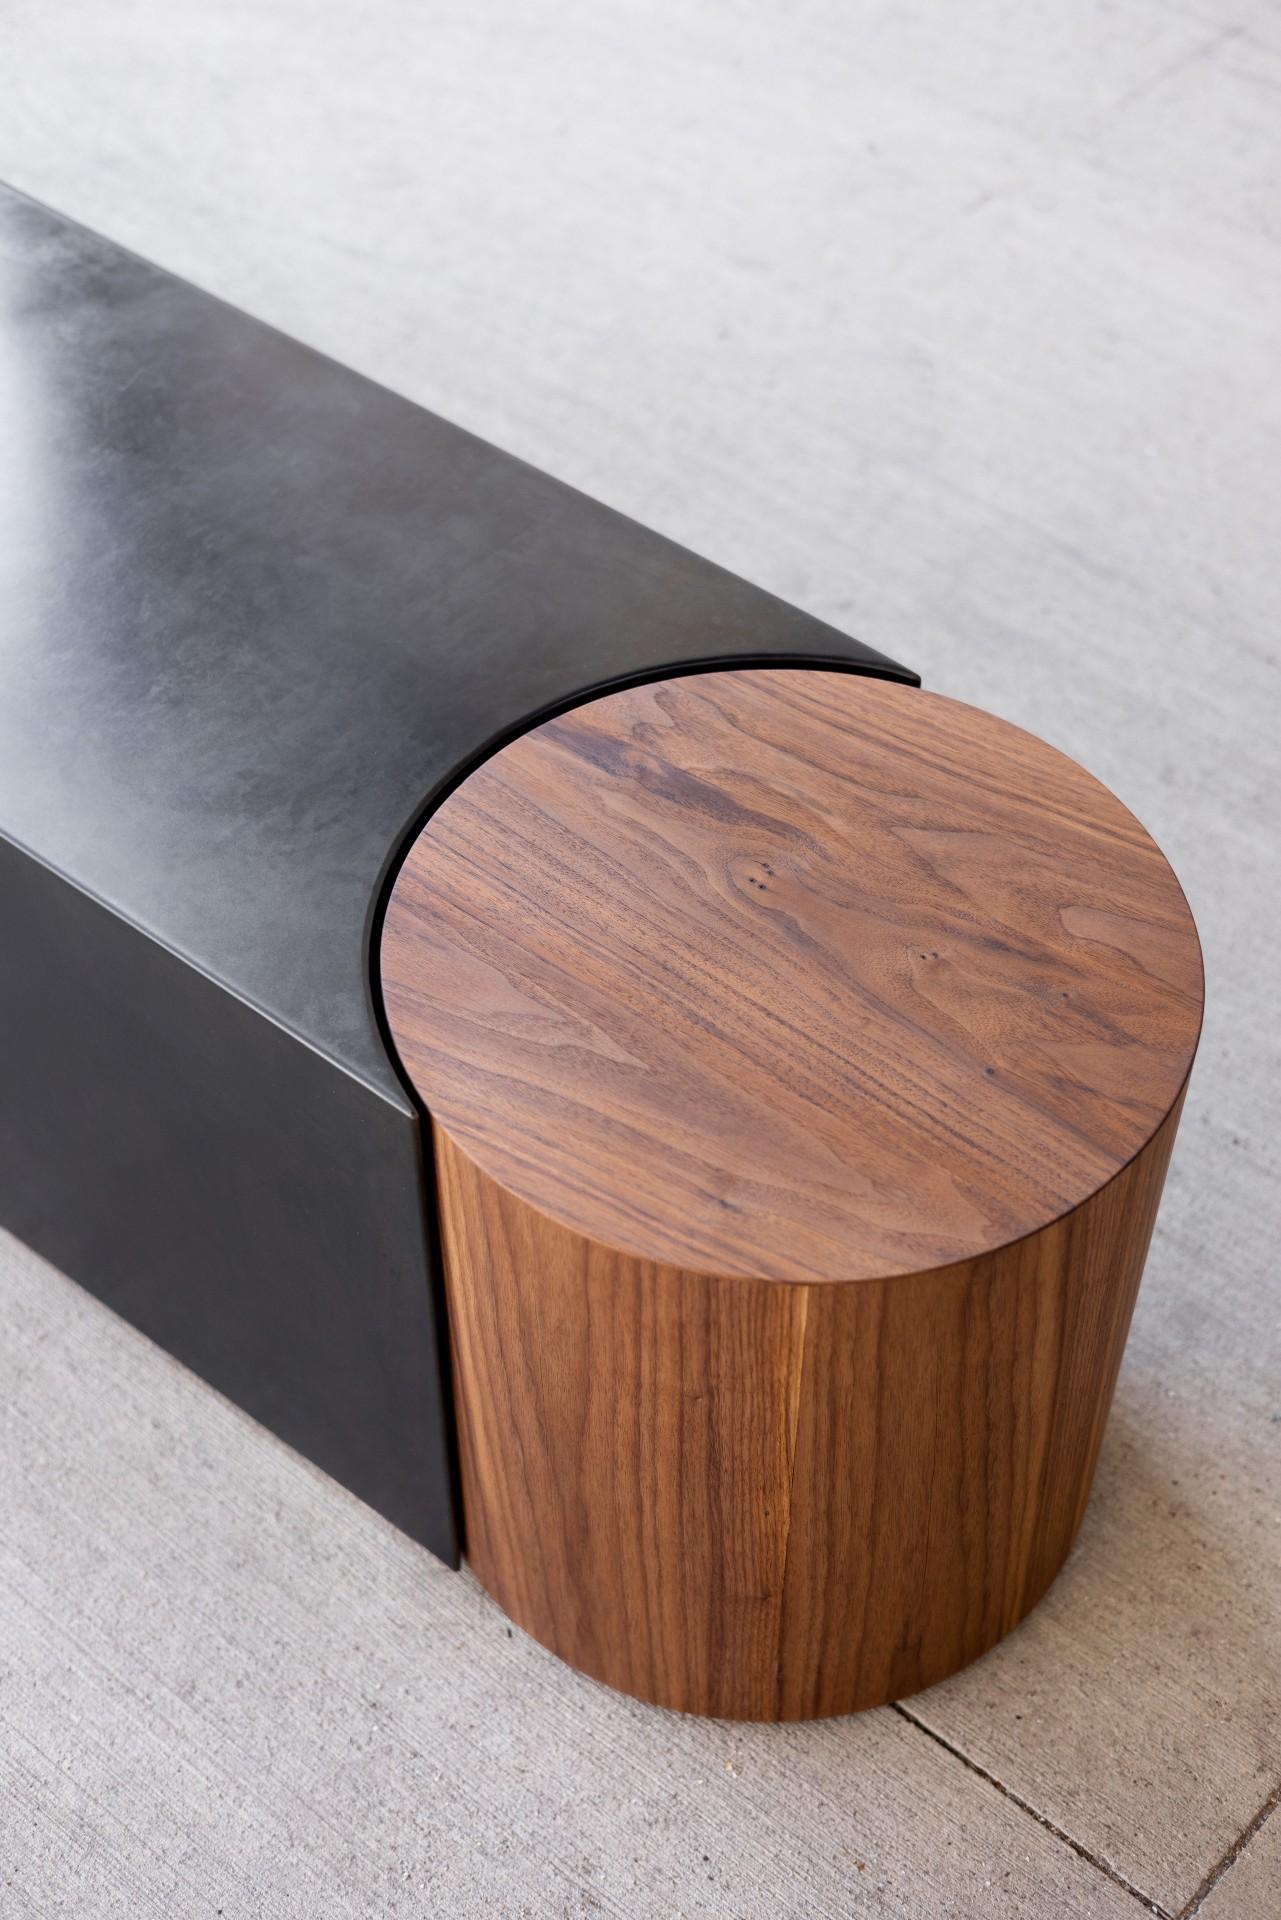 The Capsule Bench brings together a deep rich patinated steel body with a warm walnut side table. 

The table is independent of the steel so it can be pulled out and used along with the bench and then put back in its place to create the complete